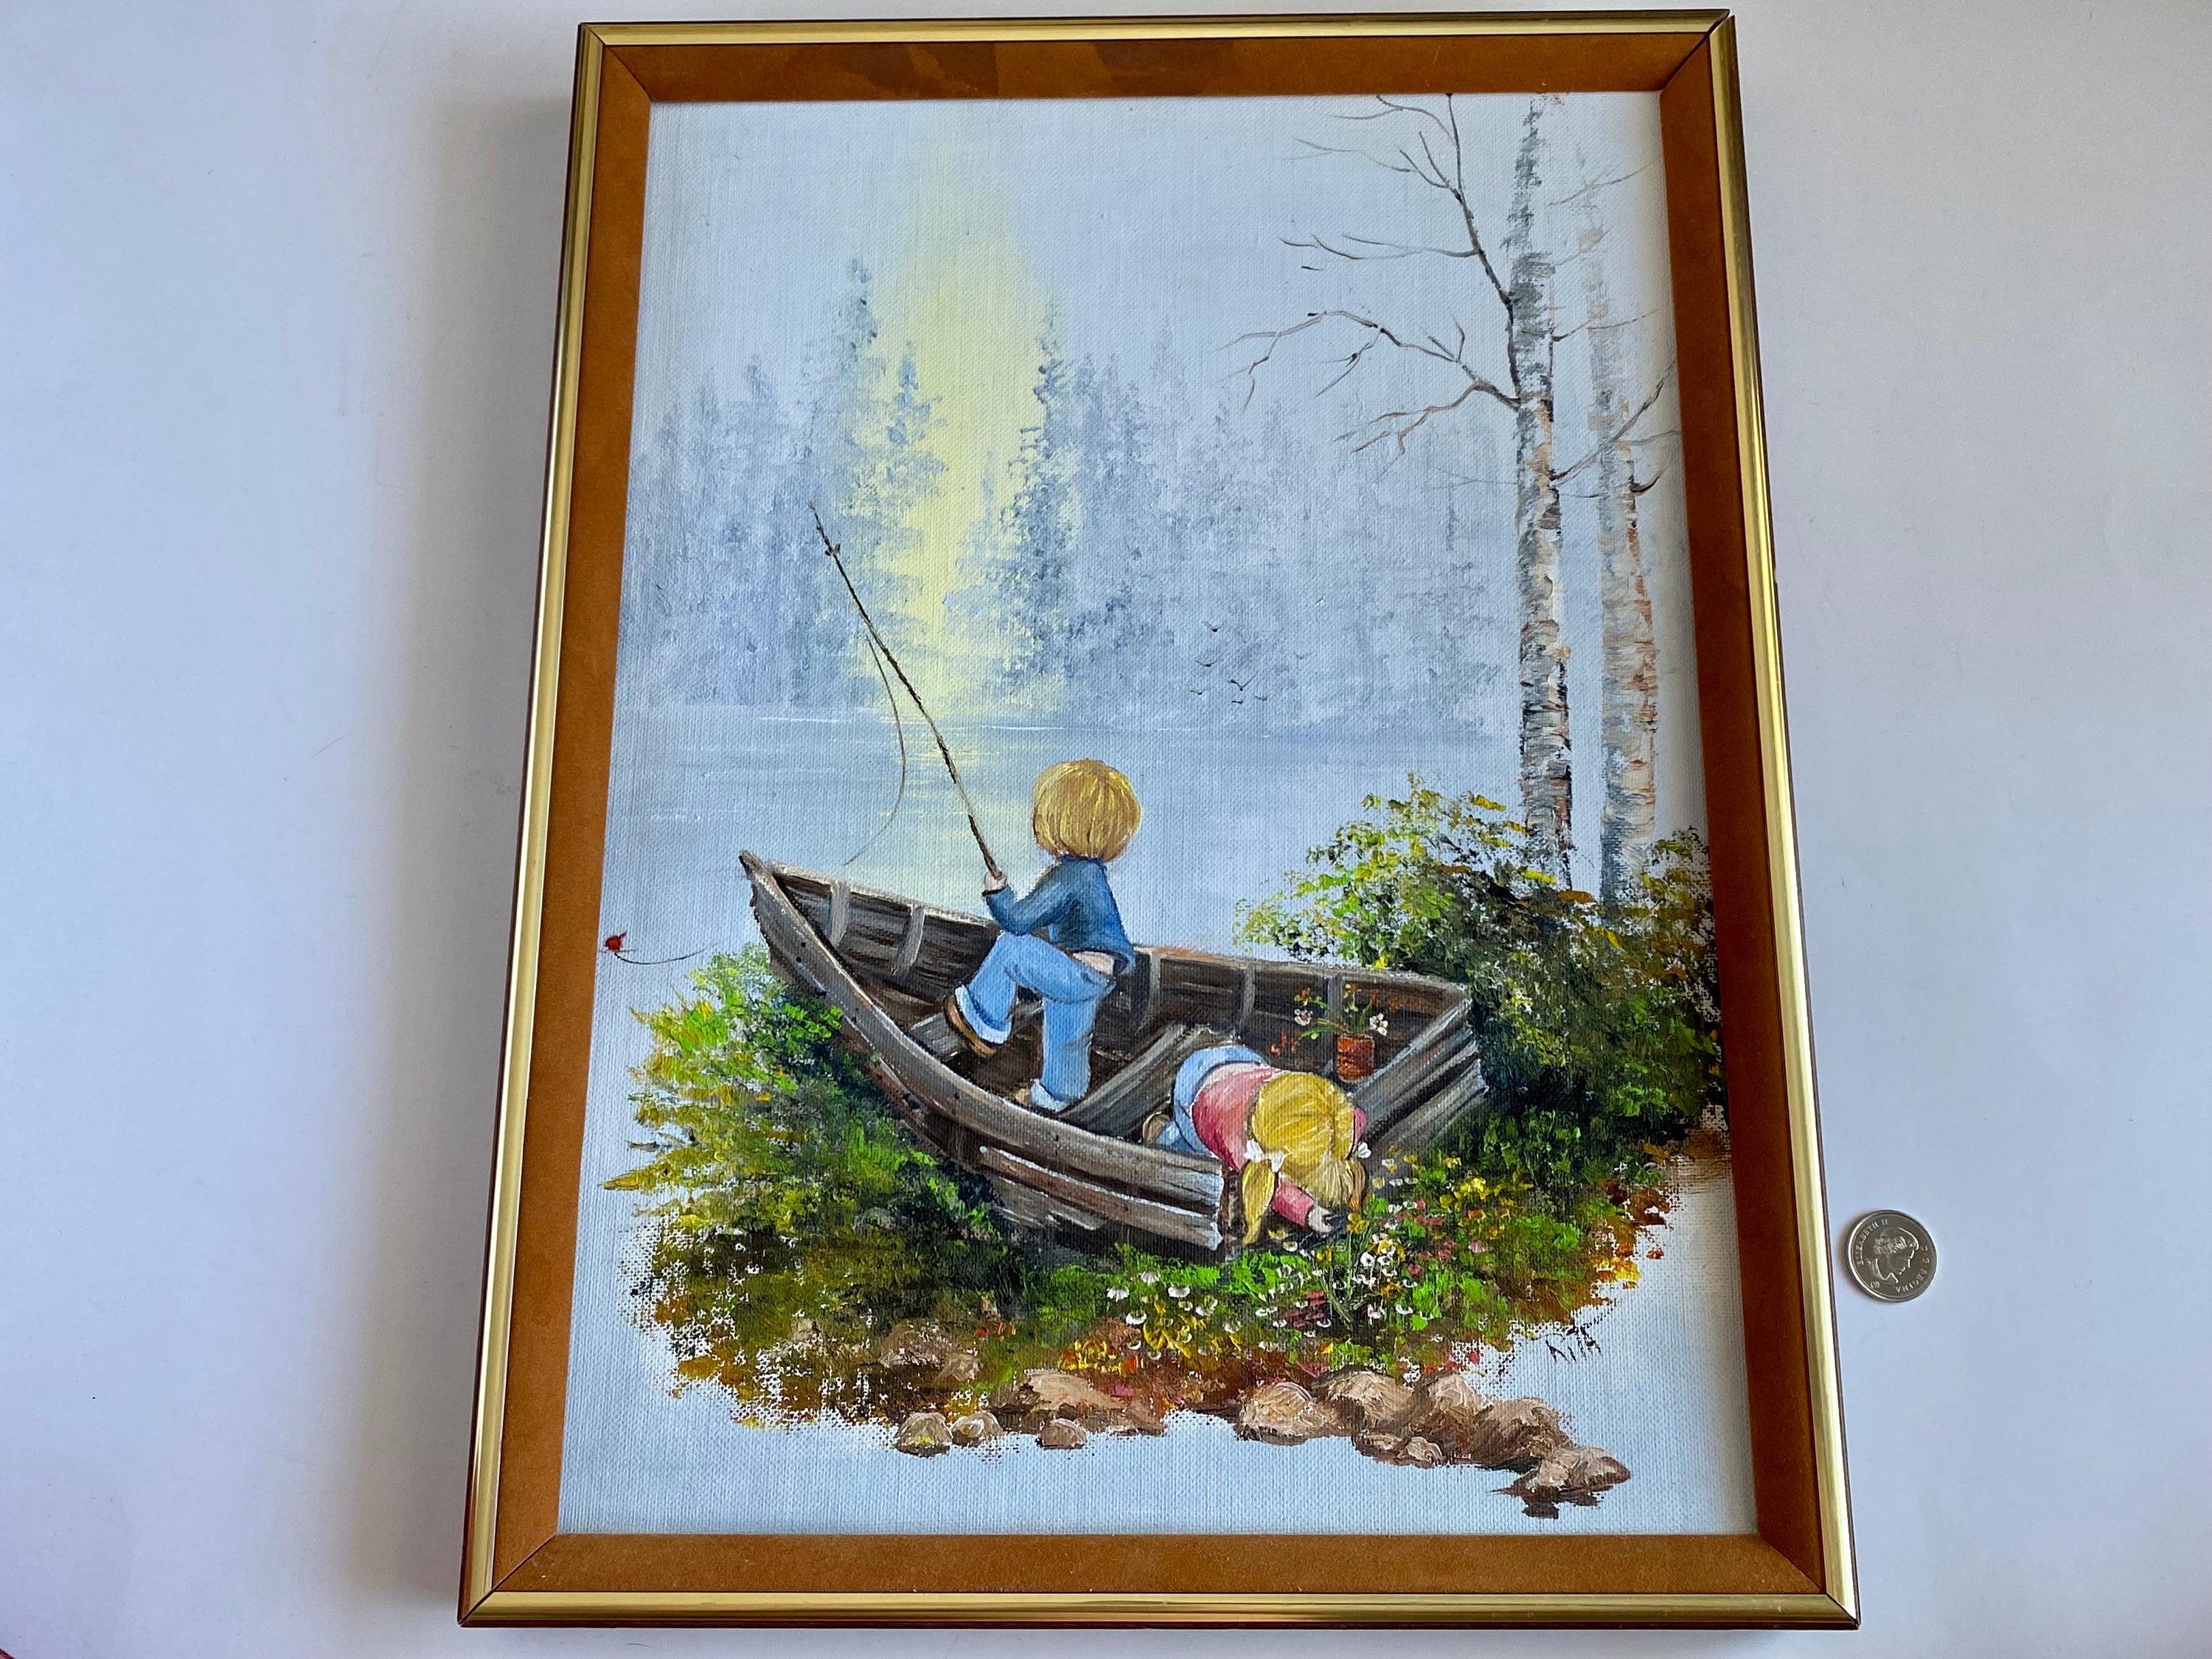 Vintage Original Oil Painting on Canvas, Nature Scene Painting, Grandmacore  County Style Art, Fishing in the Woods Rustic Collectible Art -  Sweden